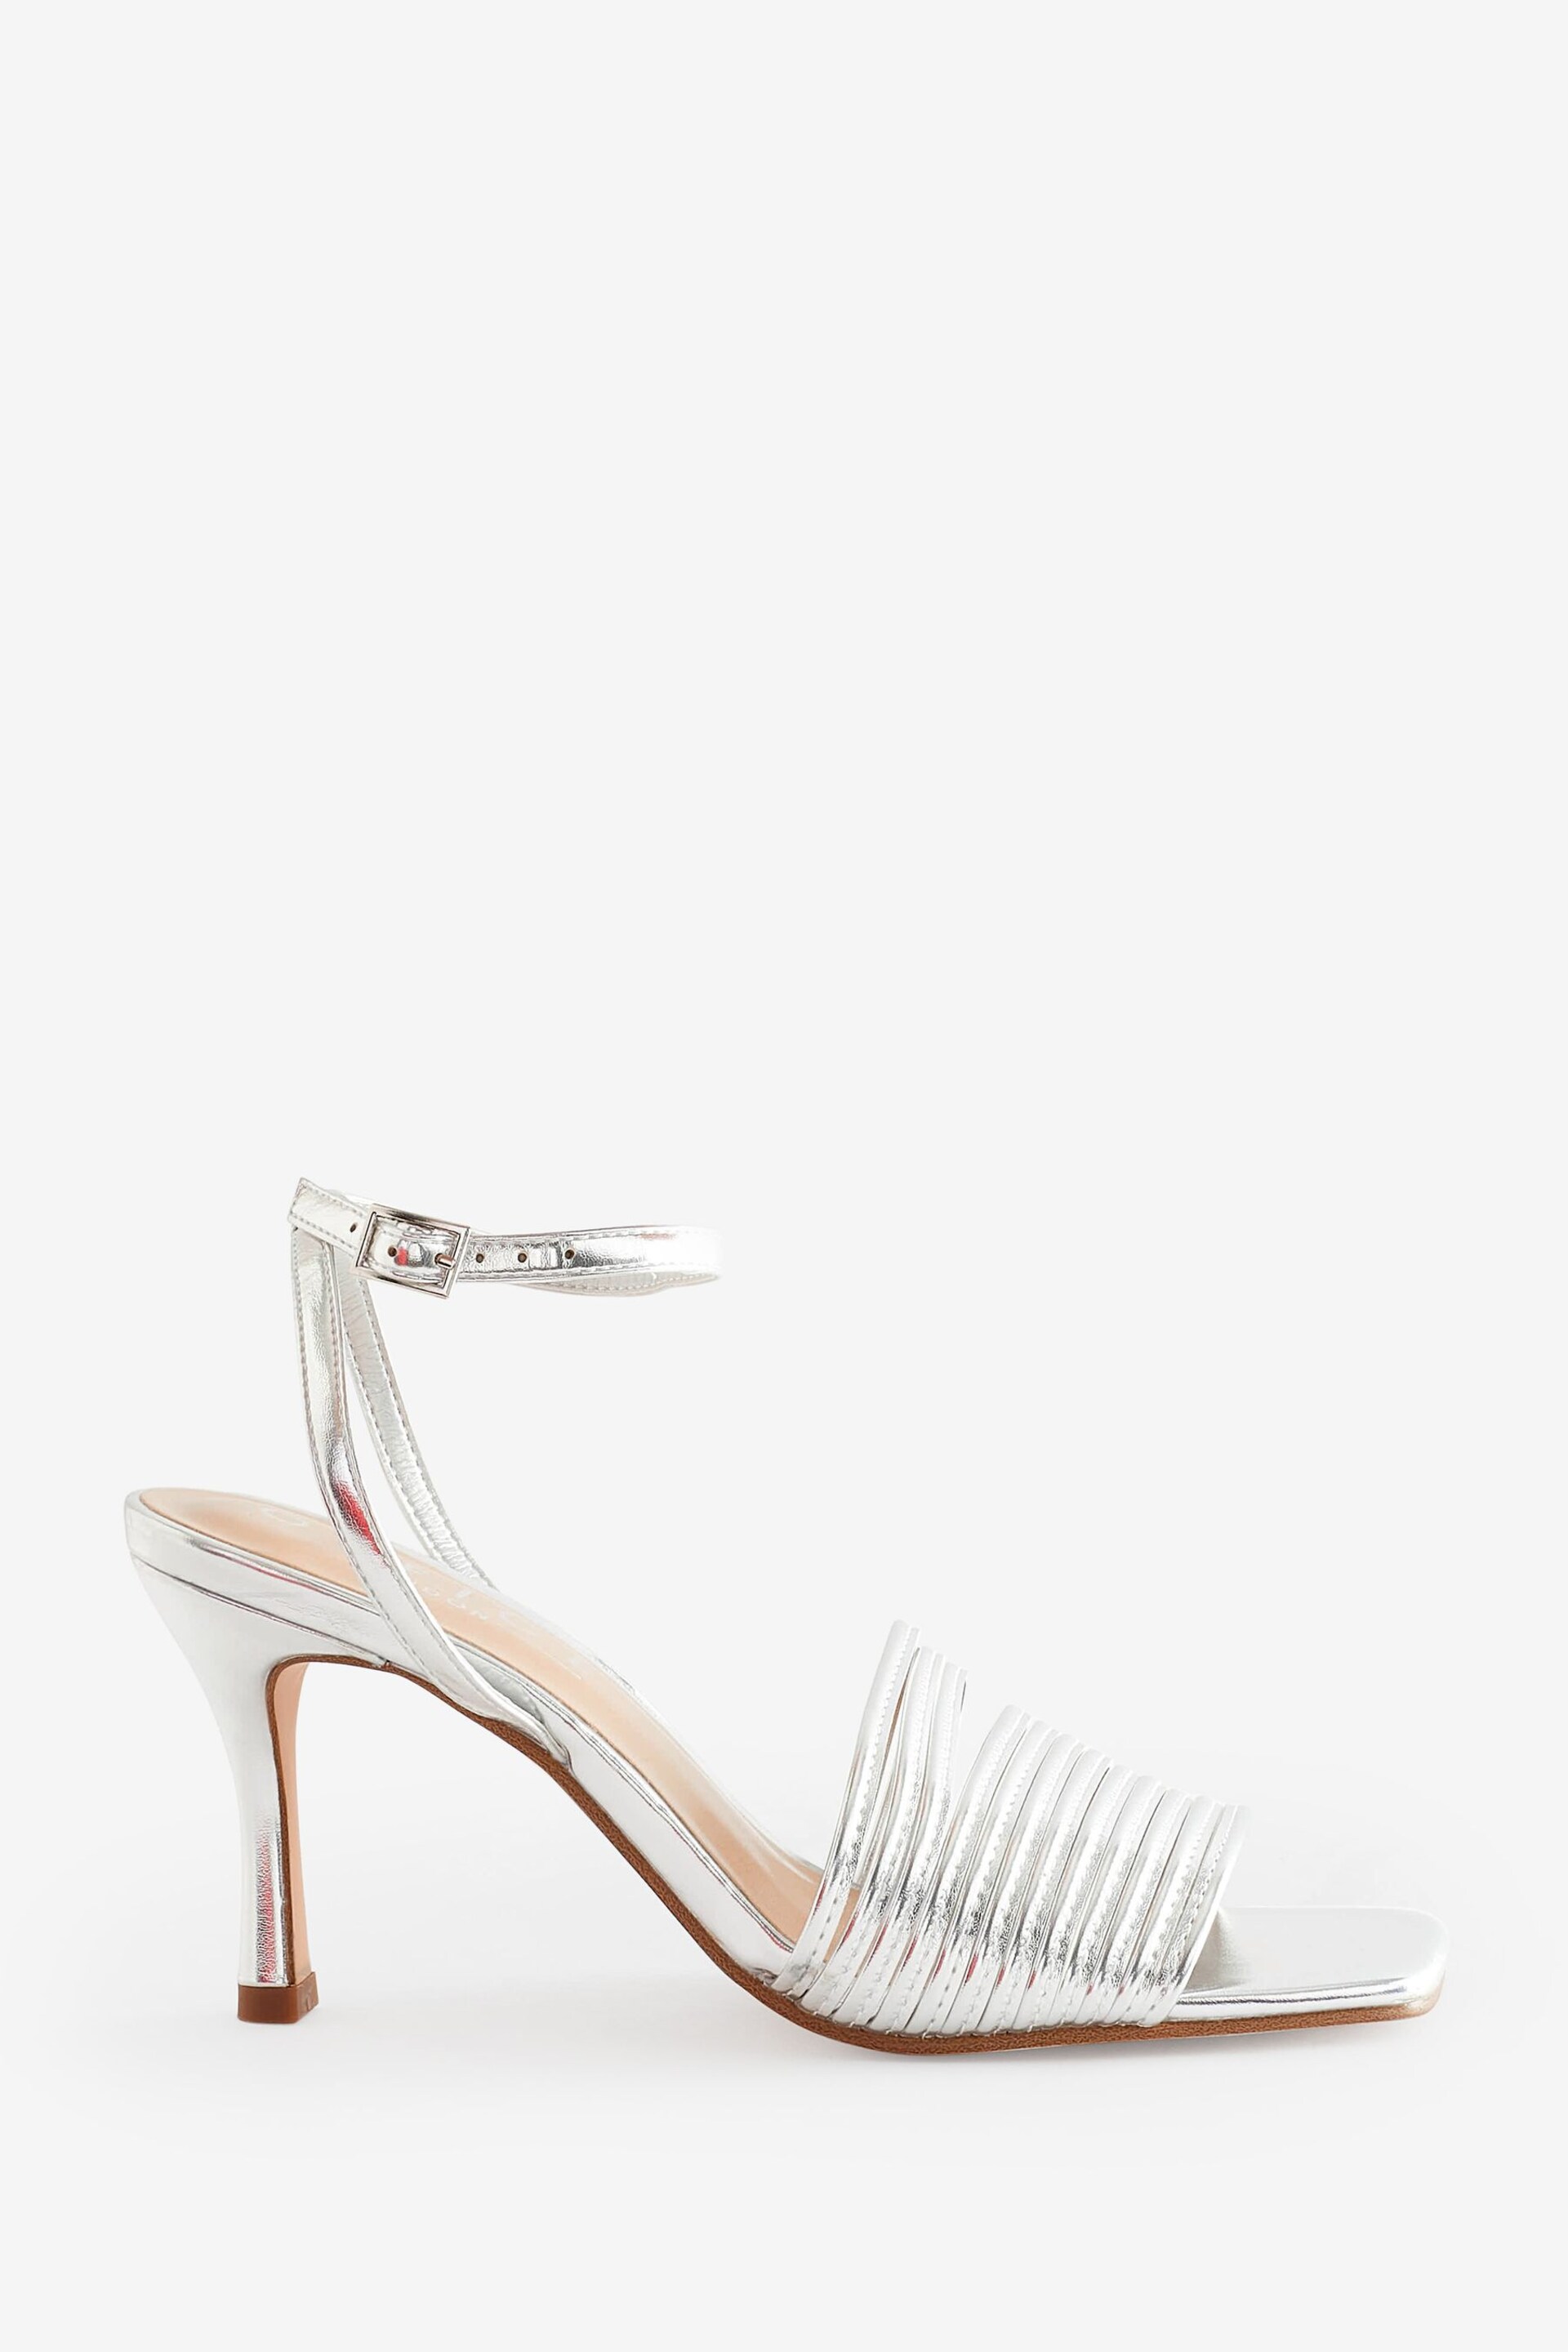 Office Silver Multi Strappy Heeled Sandals - Image 1 of 5